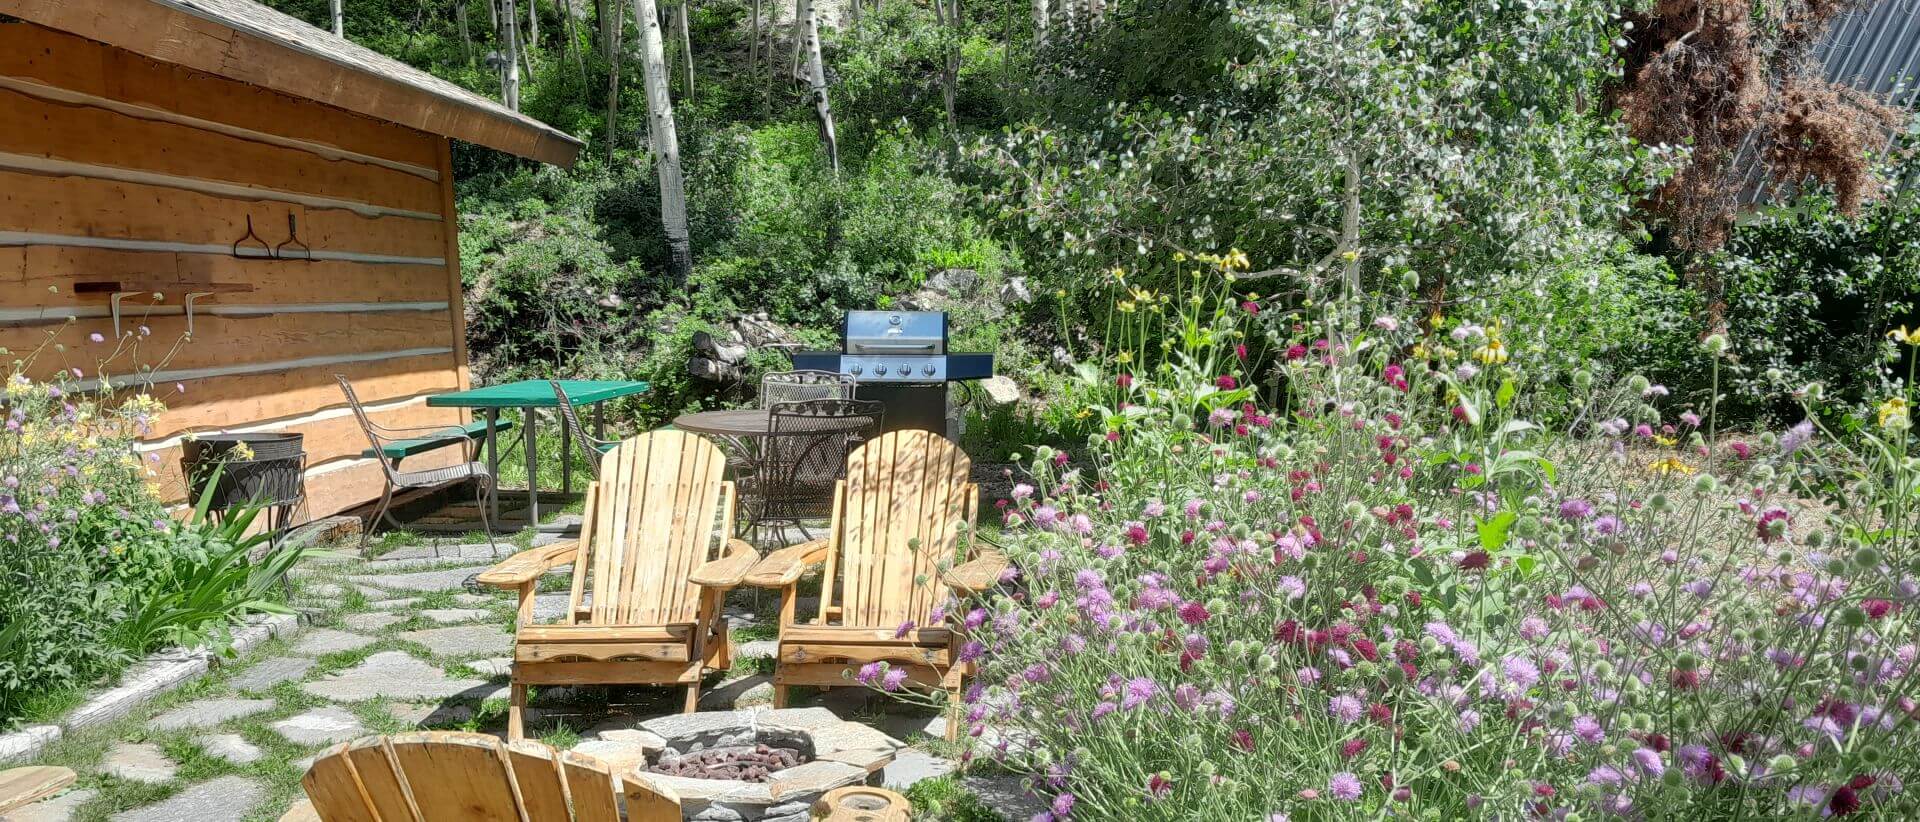 Stone patio with wildflowers, Aspen trees, chairs and stone firepit.